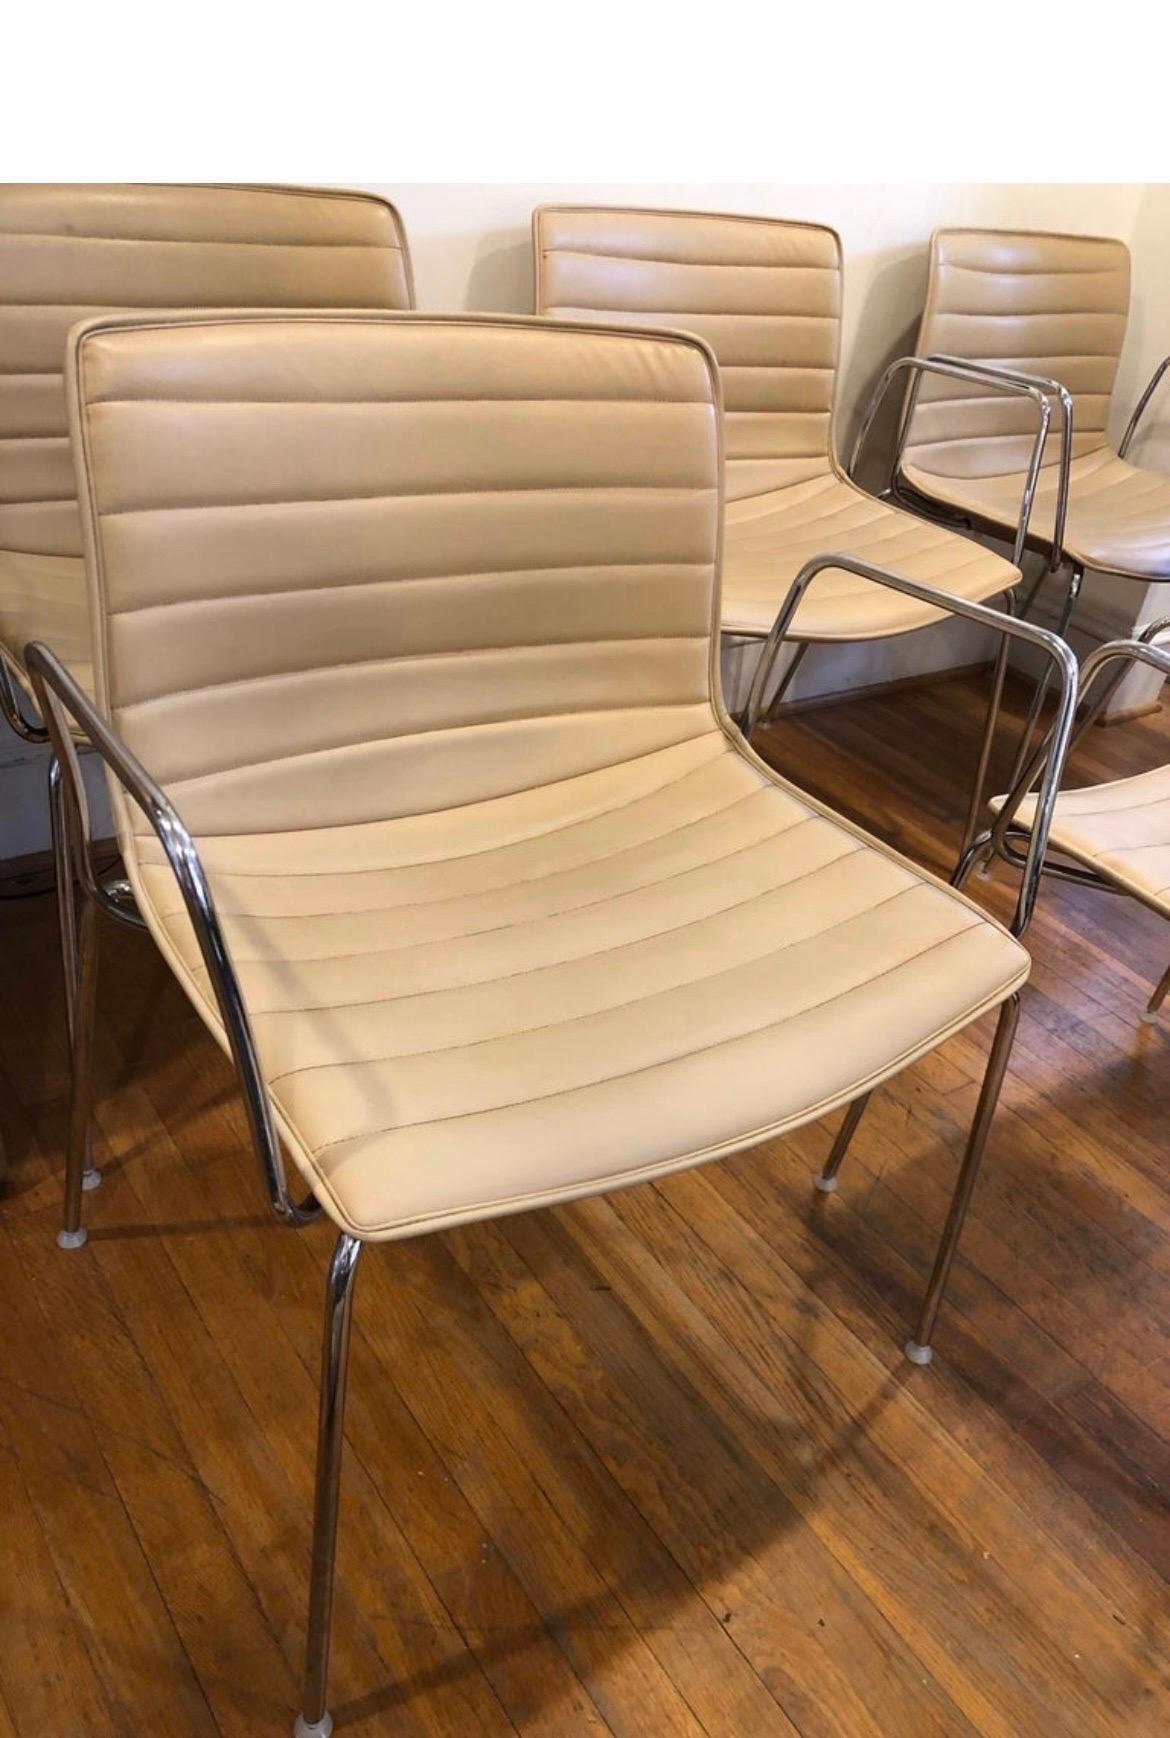 Arper Catifa 53 Chairs - Tan Leather with Steel Base and Arms - 10 Available For Sale 1